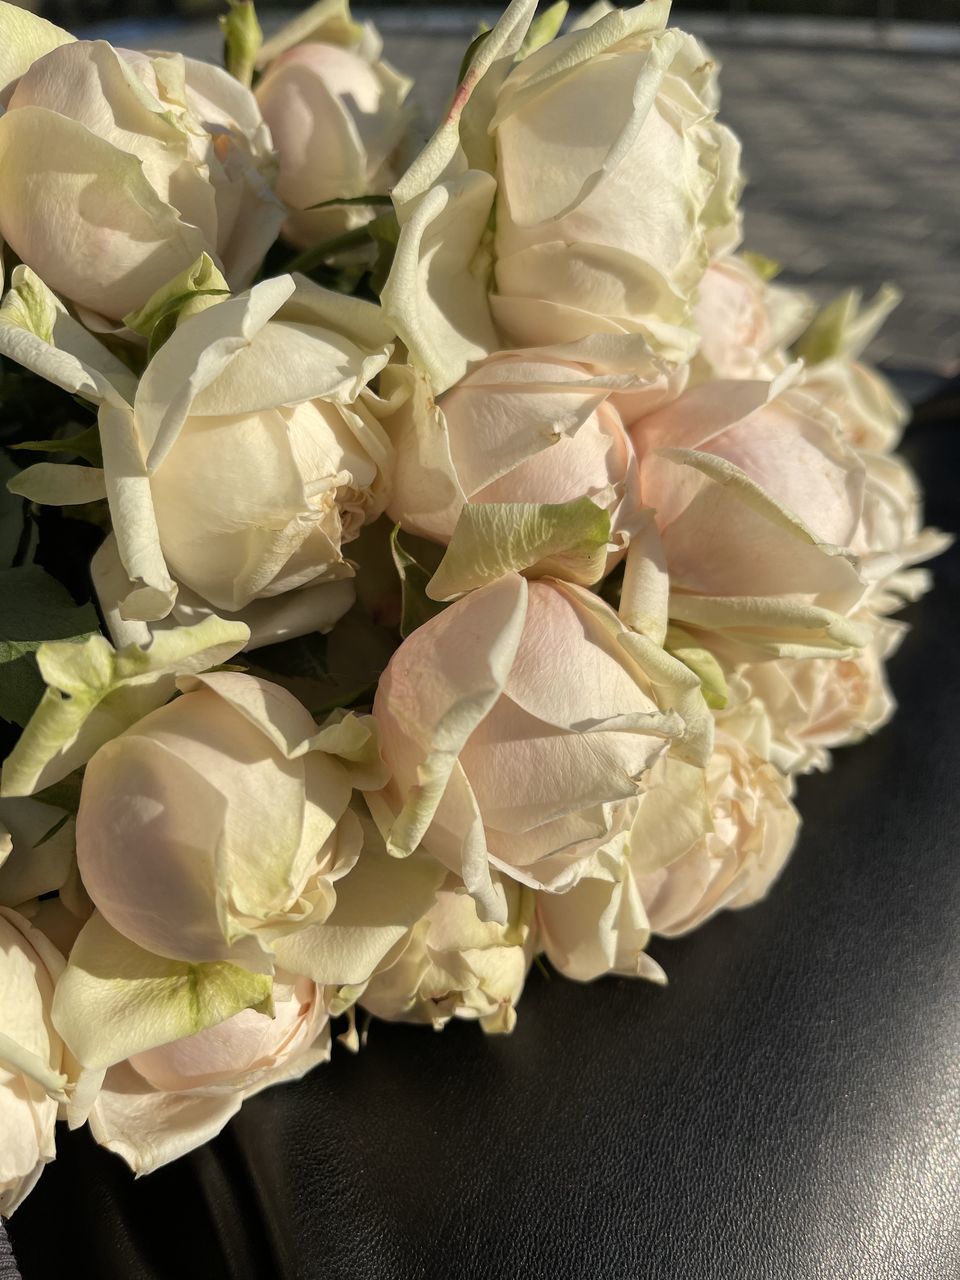 HIGH ANGLE VIEW OF BOUQUET OF WHITE ROSES